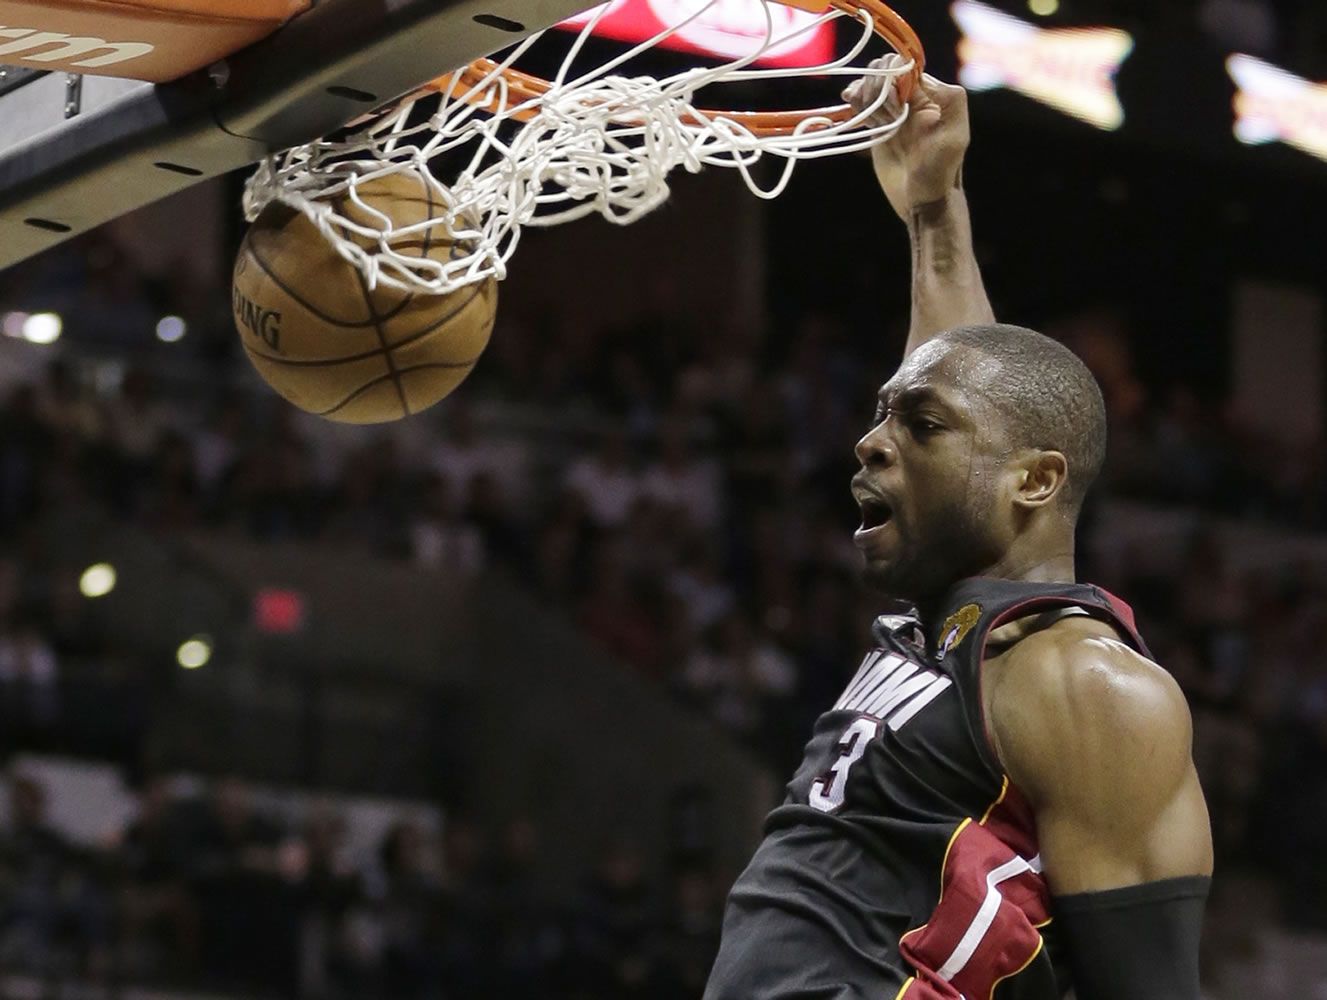 Miami Heat's Dwyane Wade (3) dunks against the San Antonio Spurs during the second half at Game 4 of the NBA Finals basketball series, Thursday, June 13, 2013, in San Antonio.